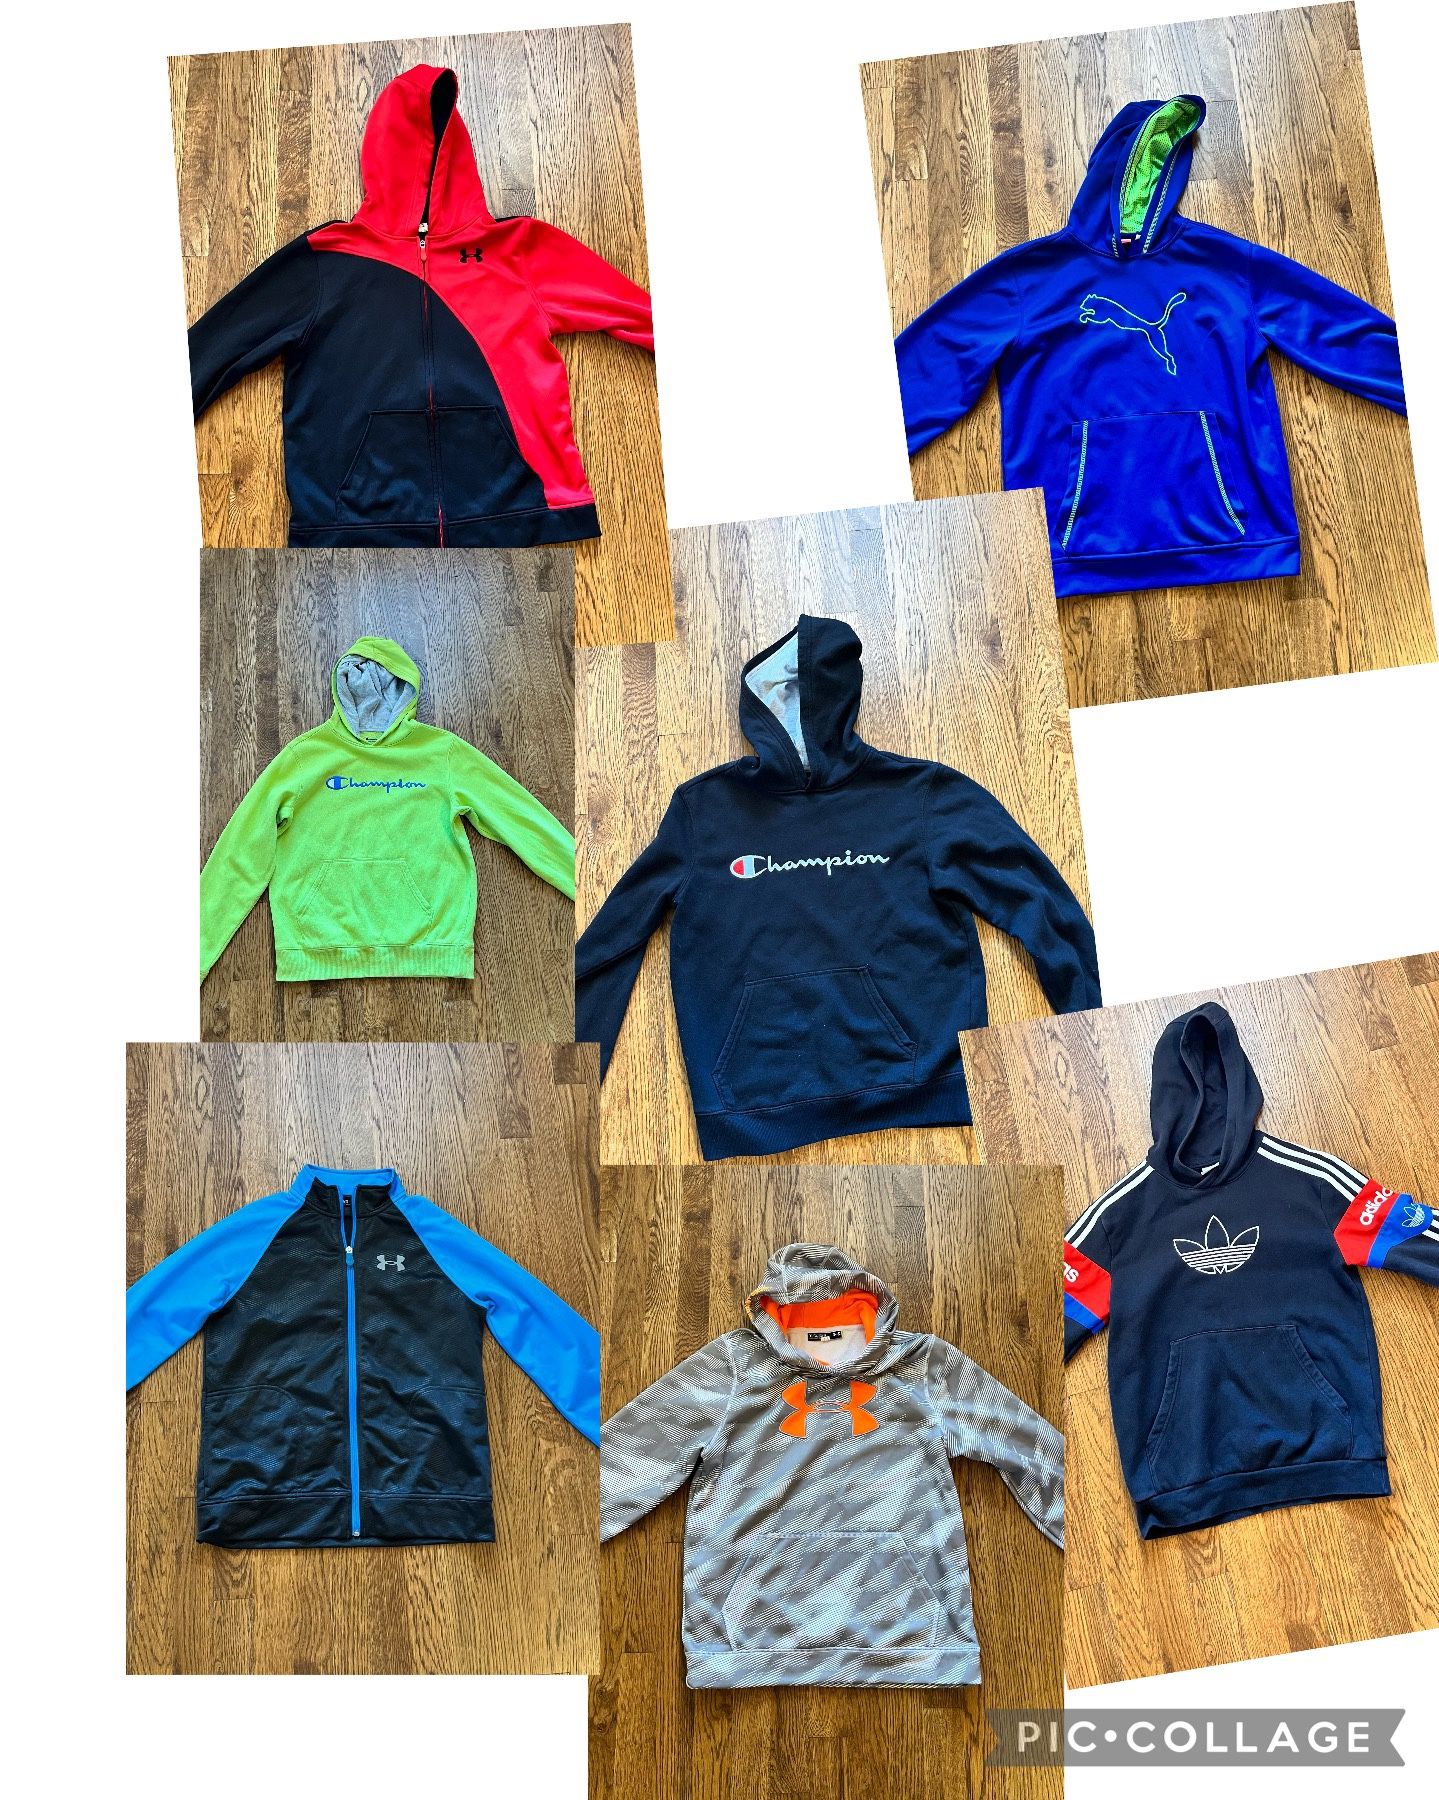 Hoodies and Jackets For Boys 8-12 